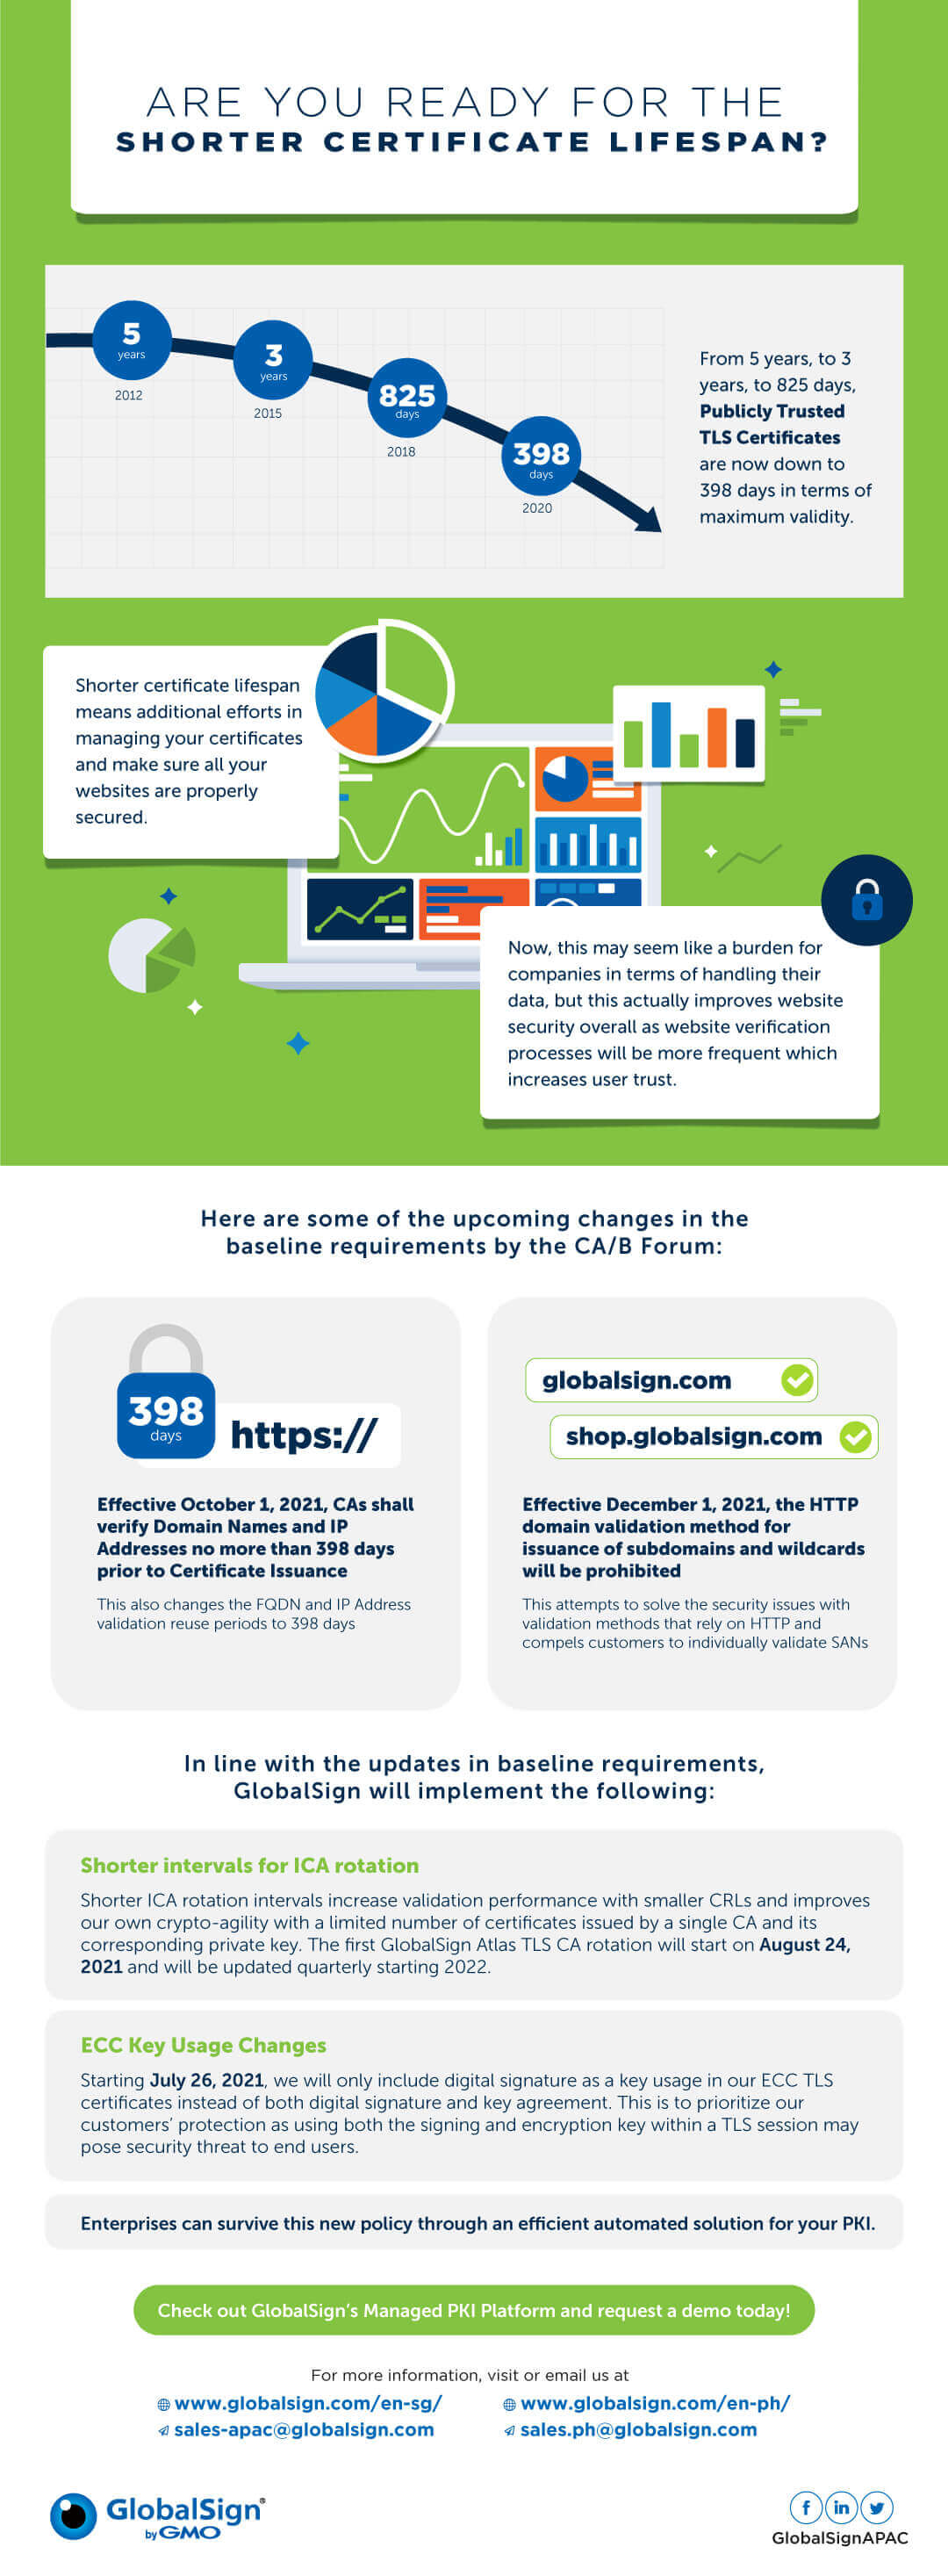 SSL_Infographic_New_CAB_Forum_Baseline_Requirement_2_APAC_2021_07_15_Approved.jpg